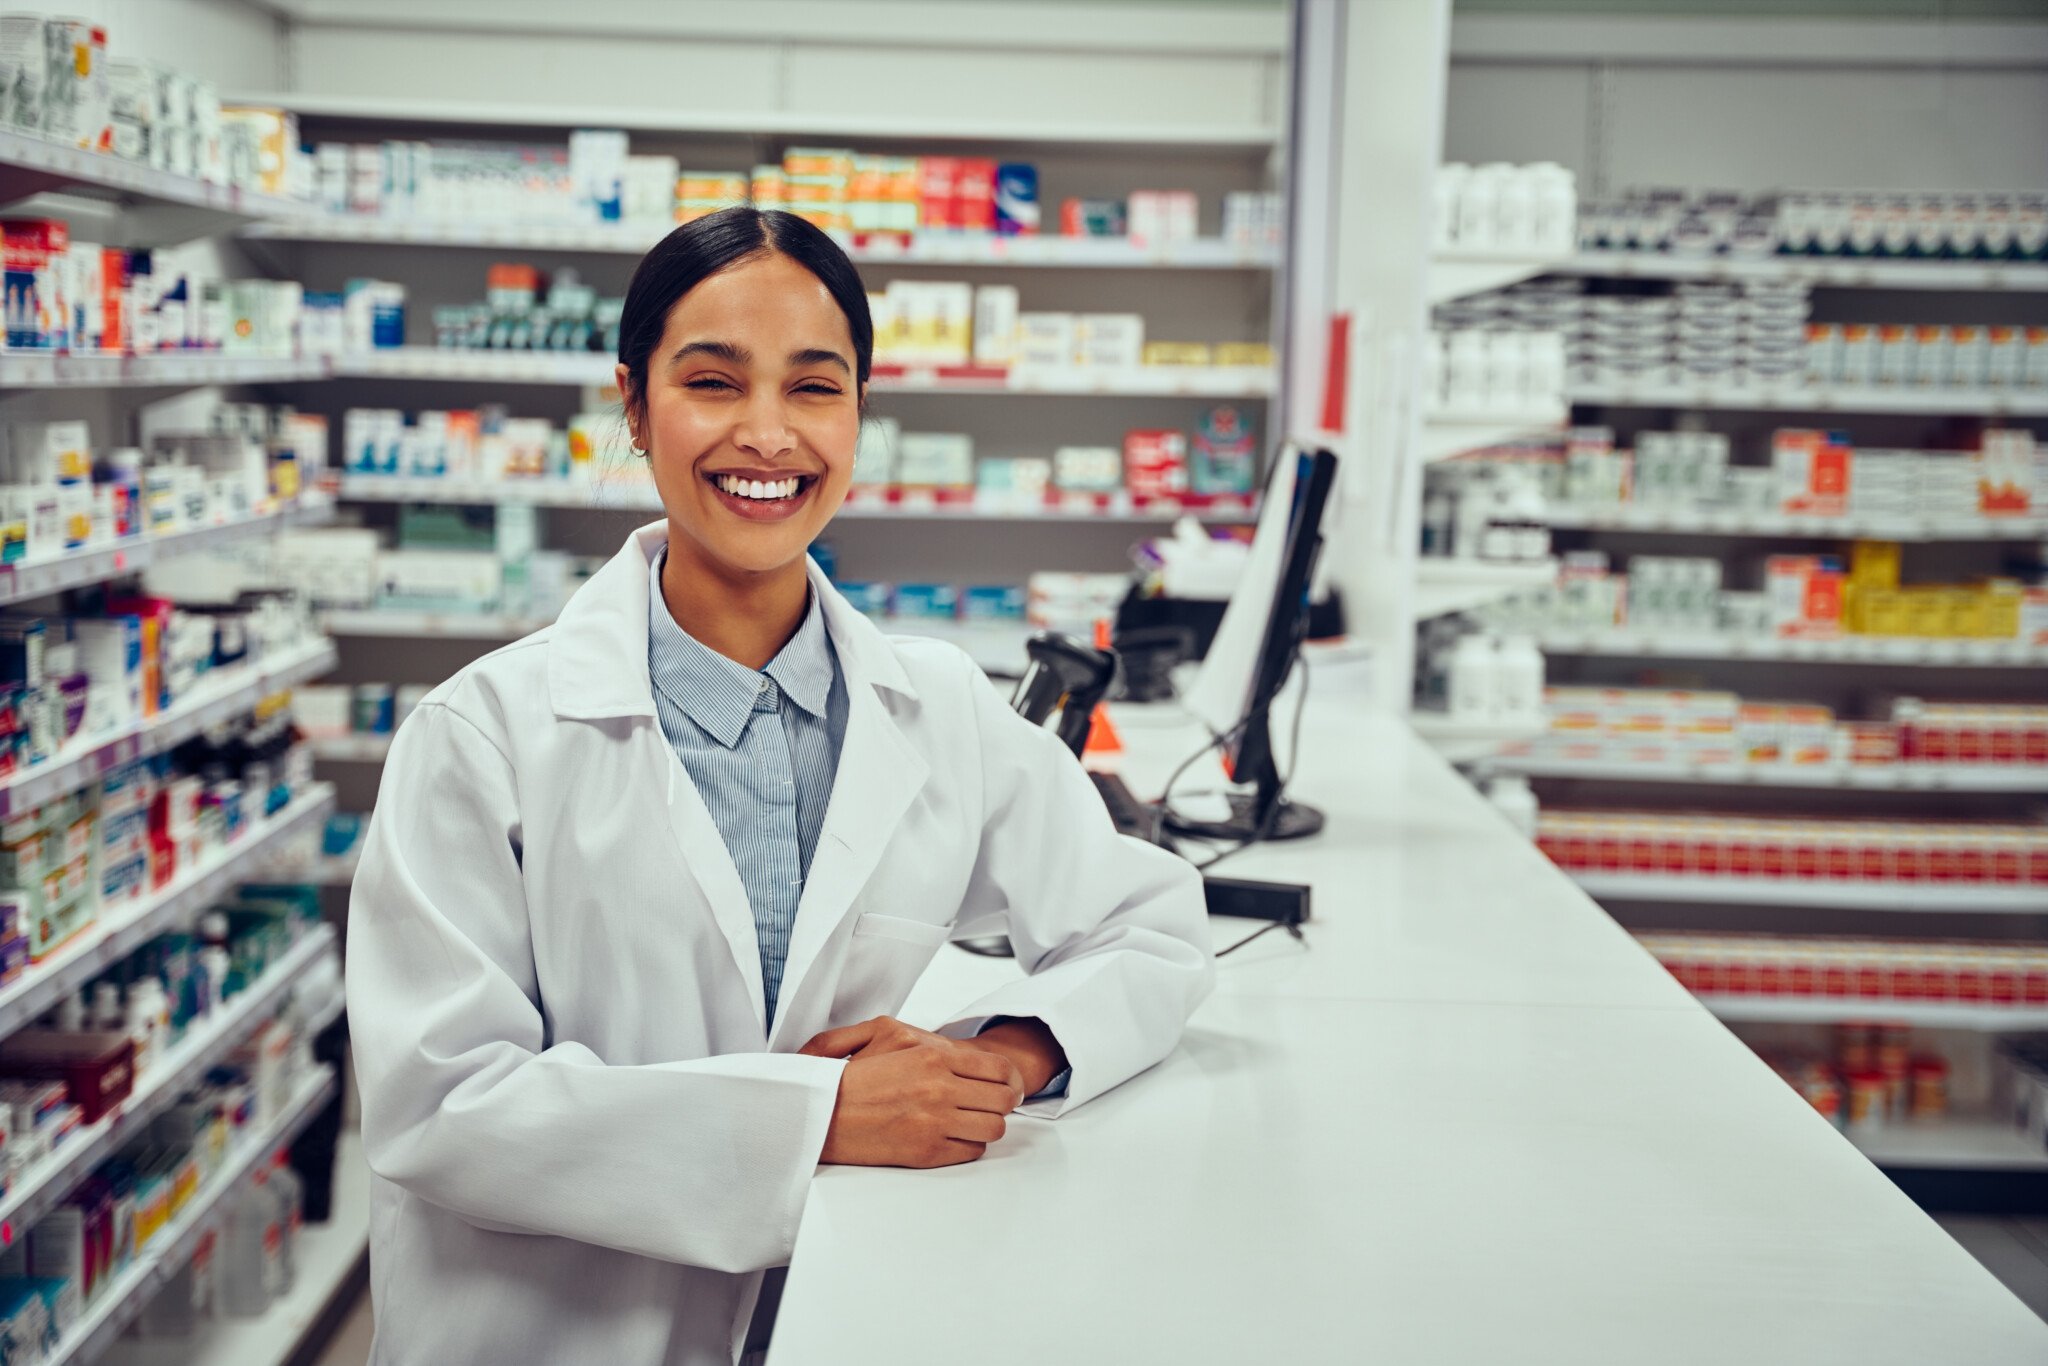 Smiling happy young woman pharmacist leaning on a desk in the pharmacy